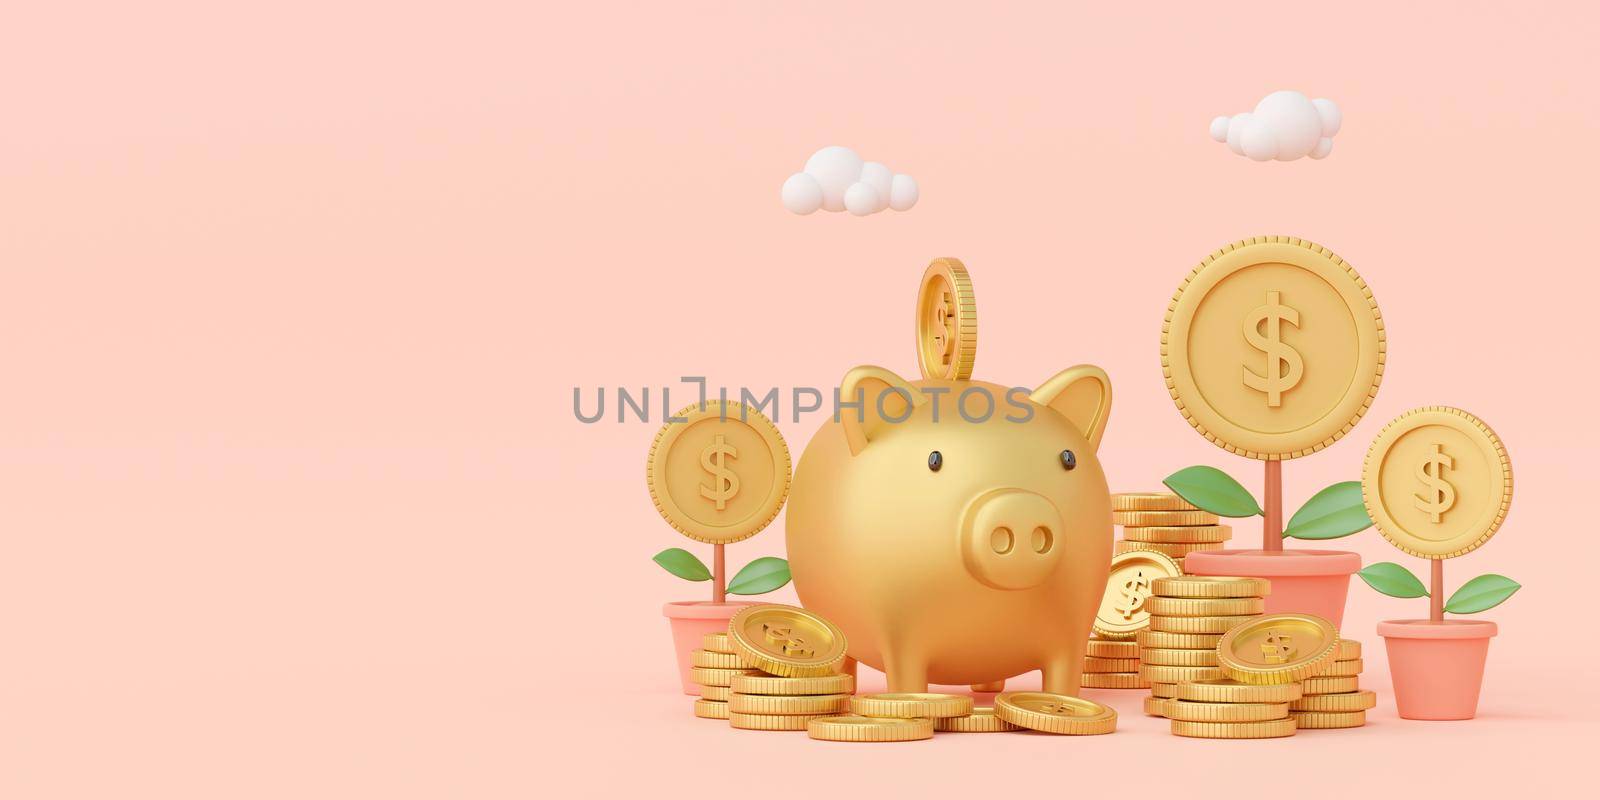 Money Savings Concept, Putting a coin into Piggy bank, Banner background, 3d rendering